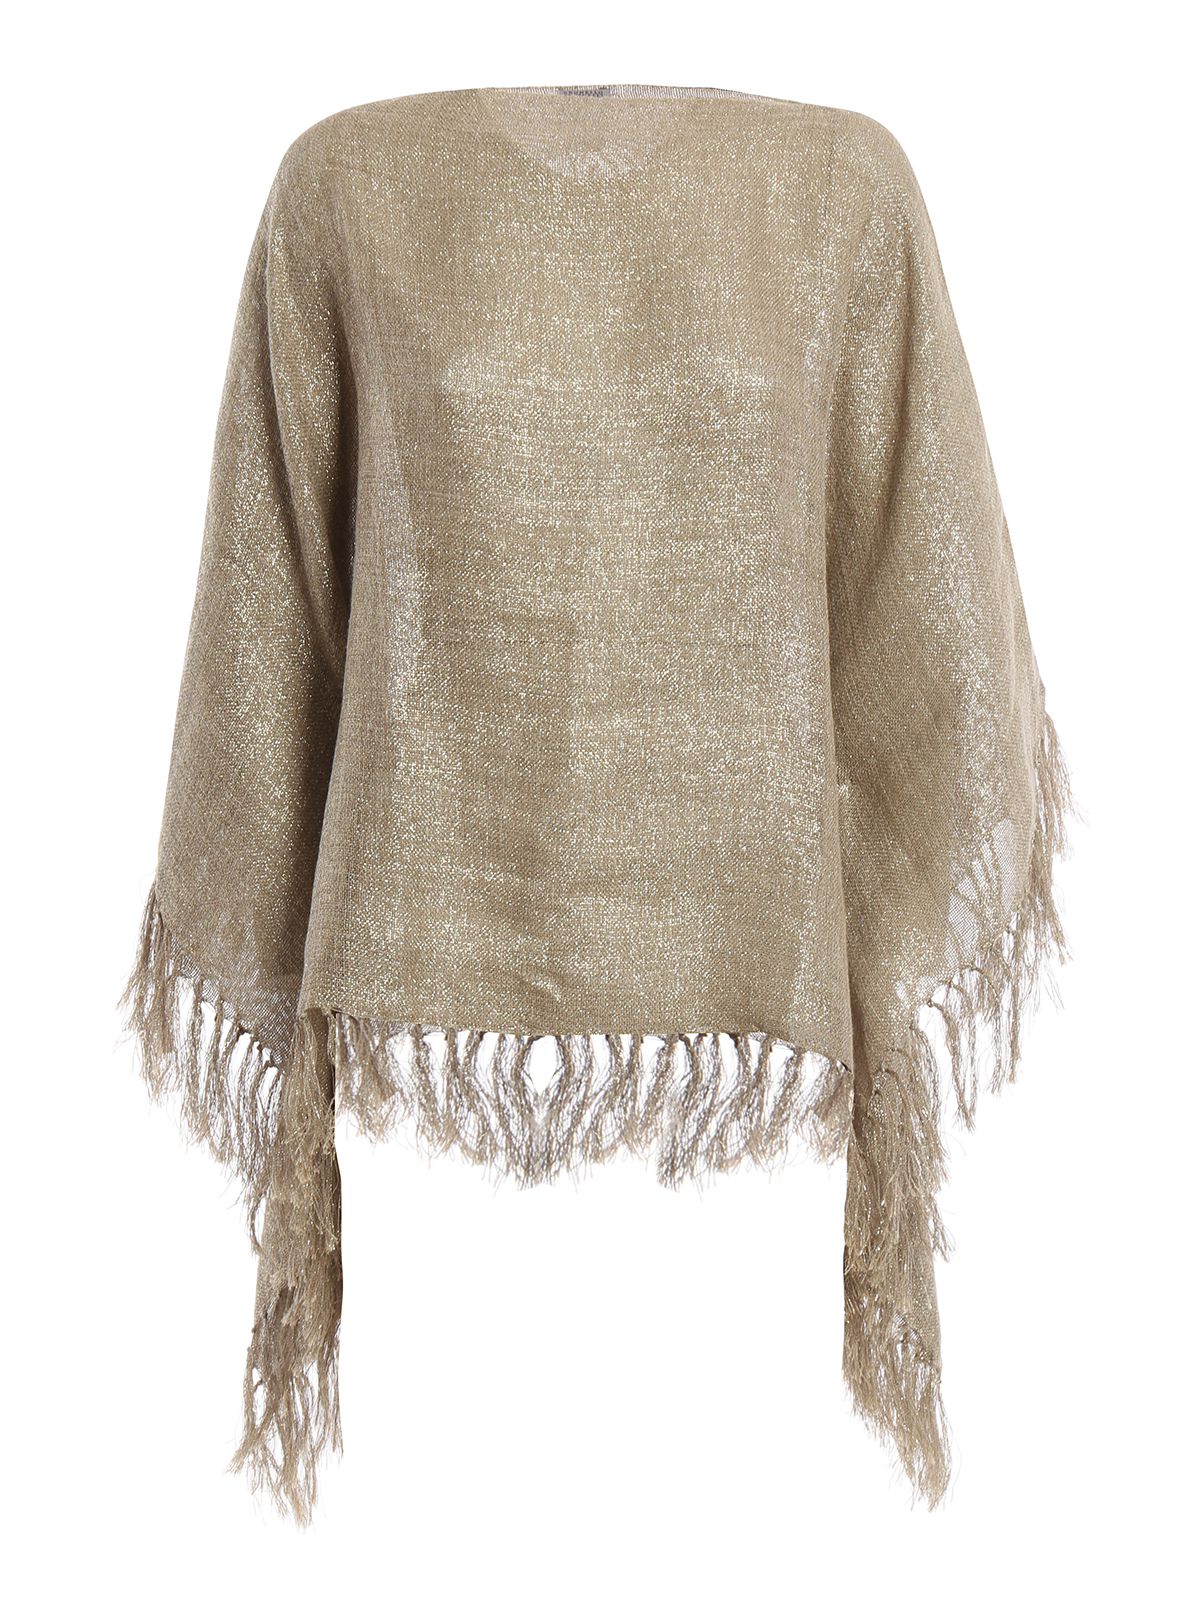 Womens Clothing Jumpers and knitwear Ponchos and poncho dresses - Save 46% White Brunello Cucinelli Linen Poncho in Black Gold 